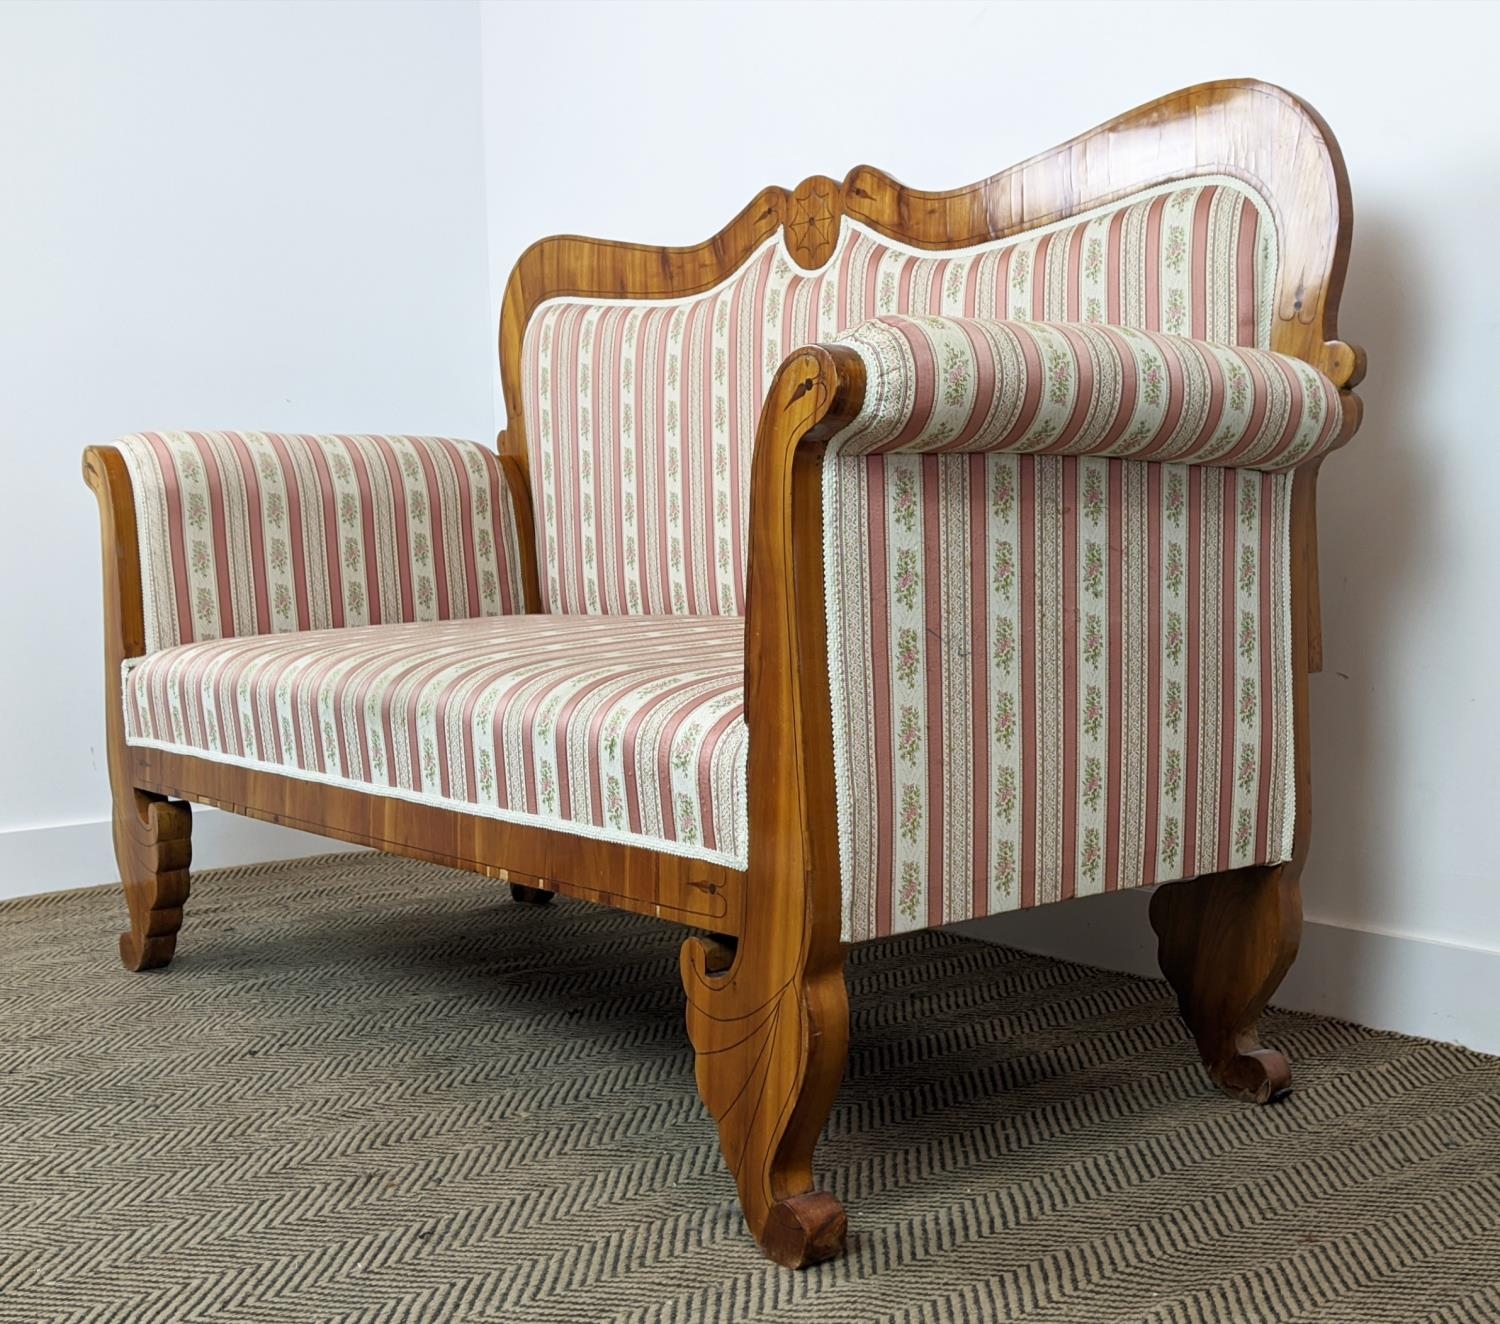 SOFA, Biedermeier cherrywood and line inlaid with pink striped upholstery, 104cm H x 168cm x 68cm. - Image 7 of 24